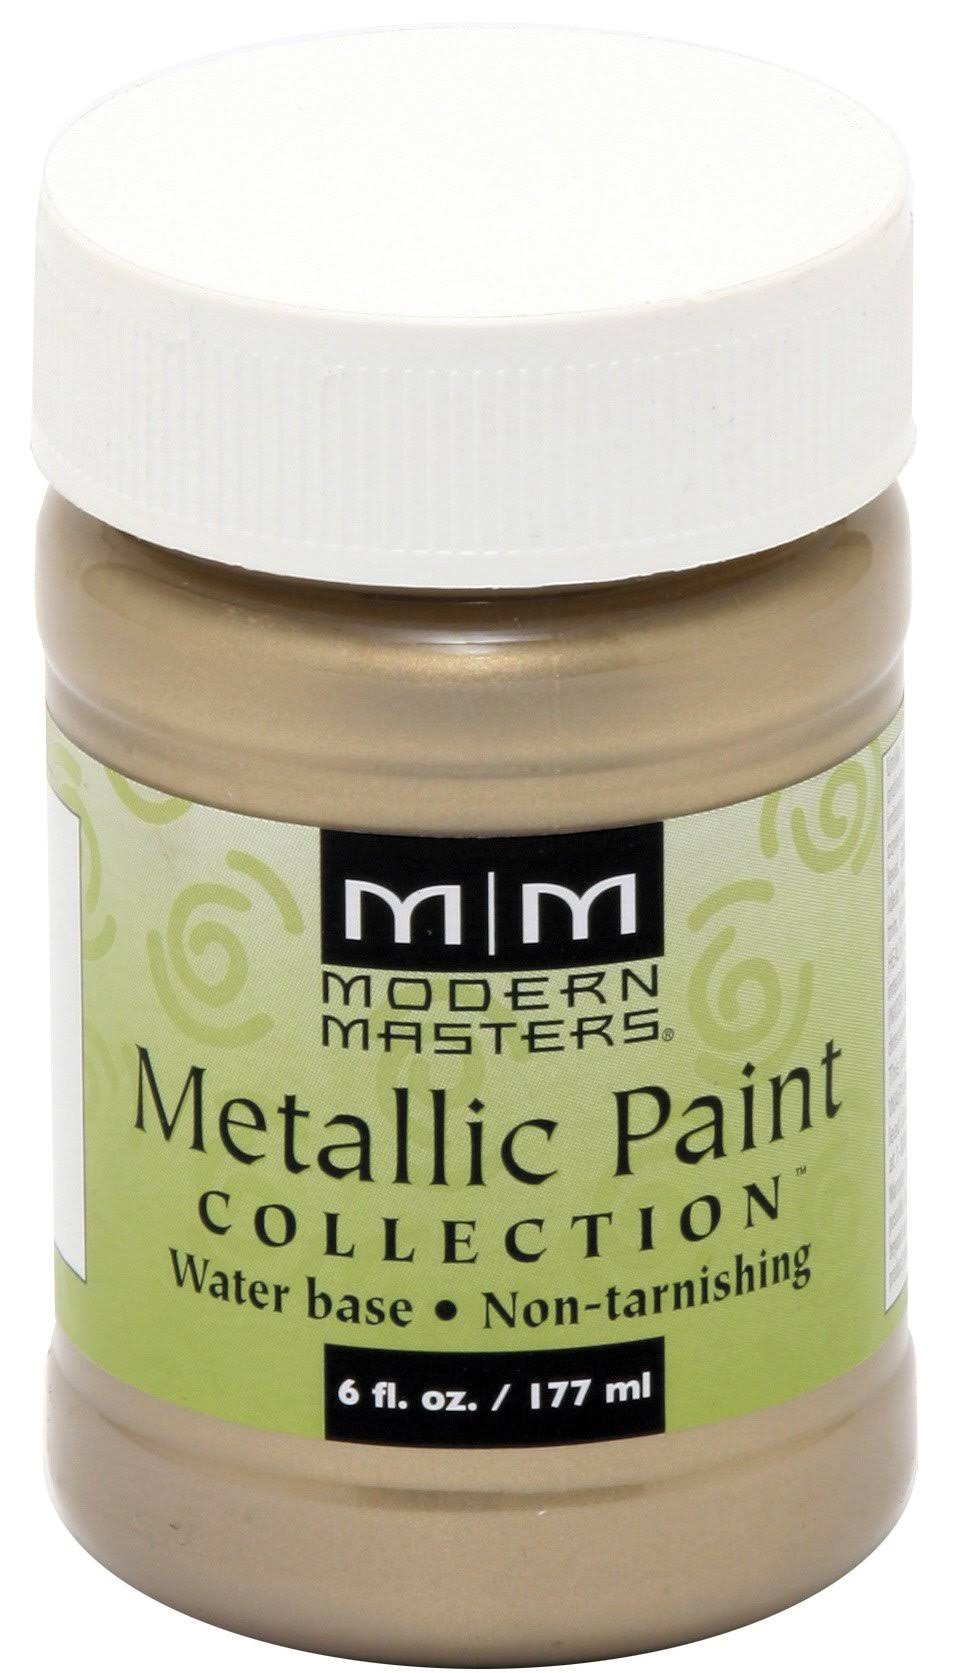 Modern Masters Metallic Paint Collection - Champagne, 177ml